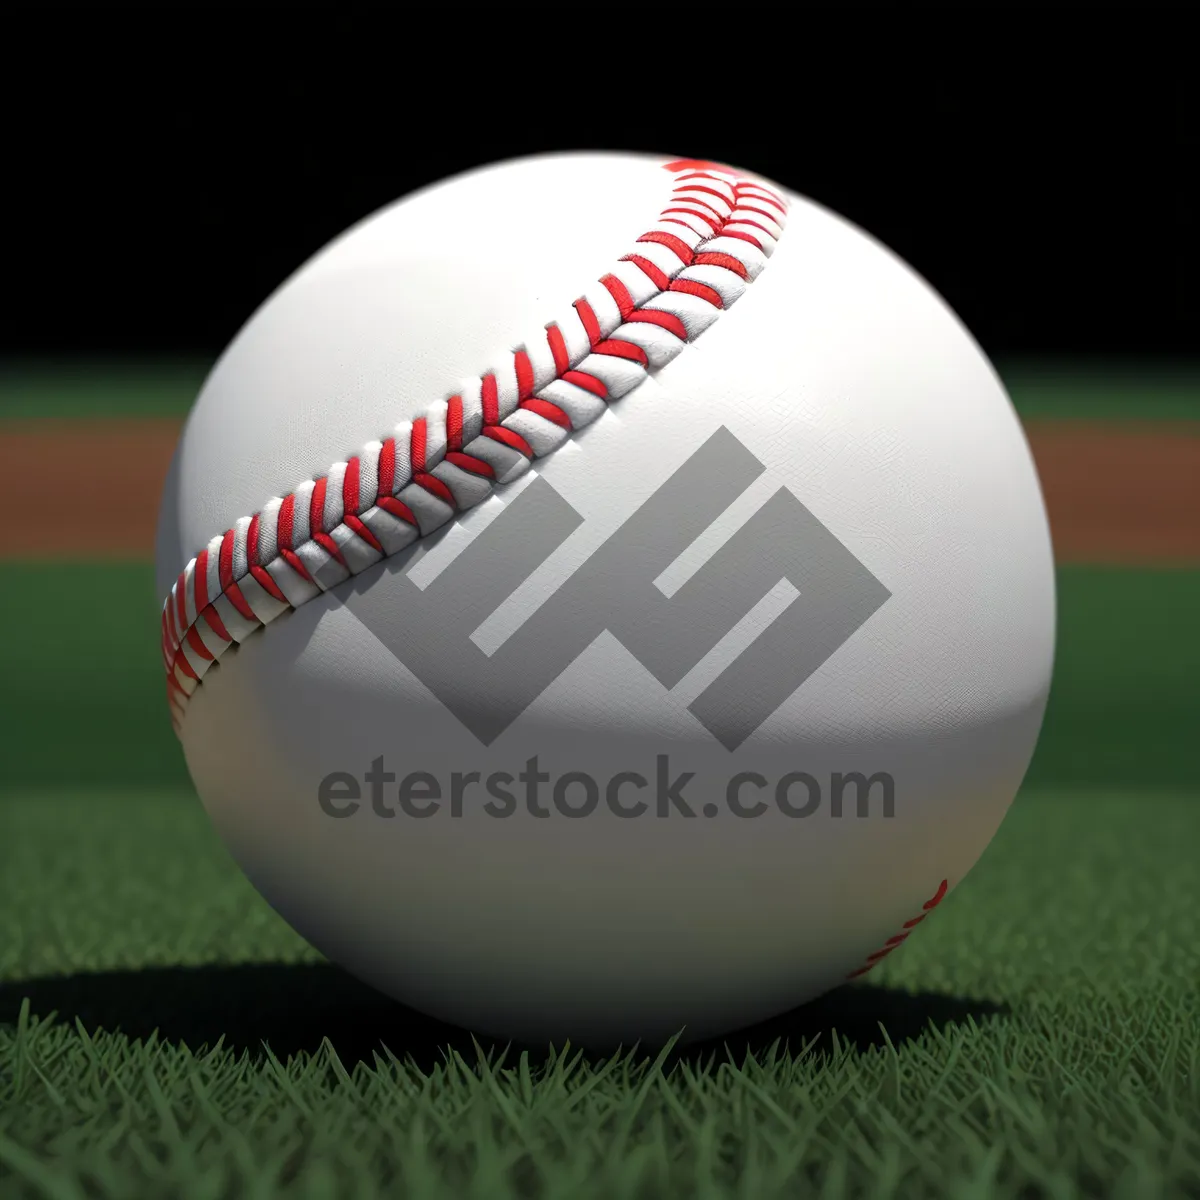 Picture of Baseball Equipment on Green Grass